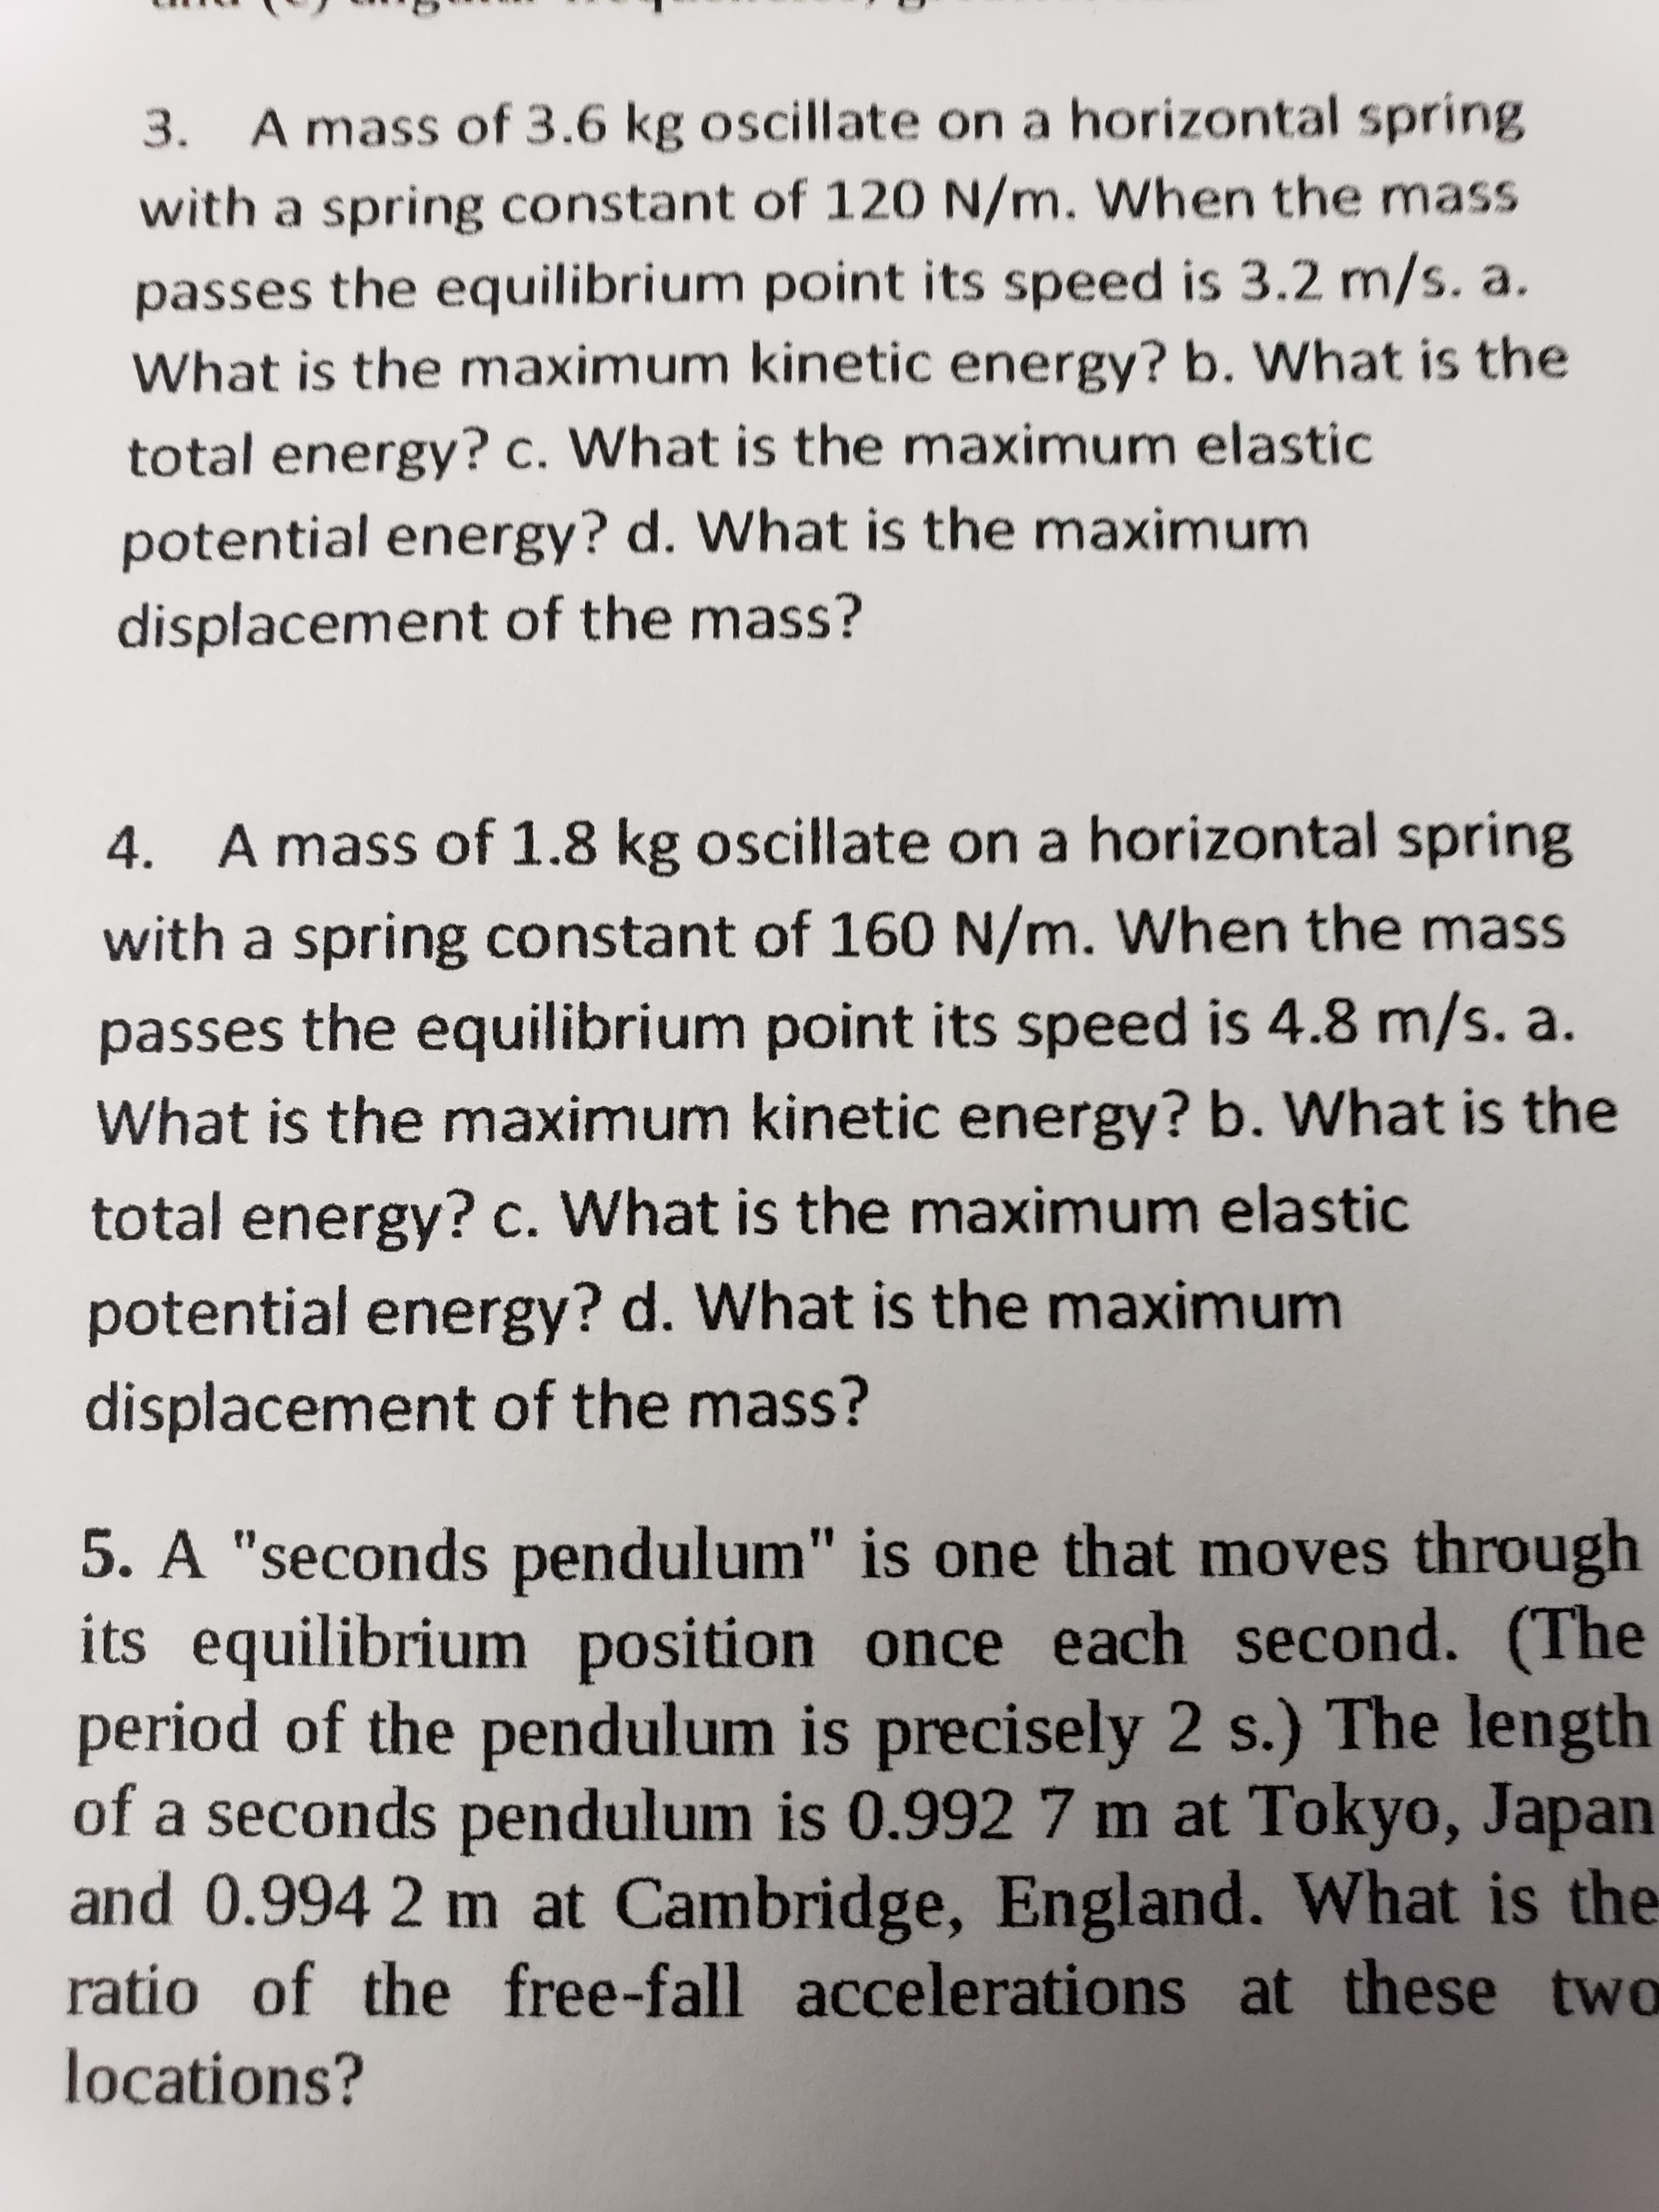 3. A mass of 3.6 kg oscillate on a horizontal spring
with a spring constant of 120 N/m. When the mass
passes the equilibrium point its speed is 3.2 m/s. a.
What is the maximum kinetic energy? b. What is the
total energy? c. What is the maximum elastic
potential energy? d. What is the maximum
displacement of the mass?
